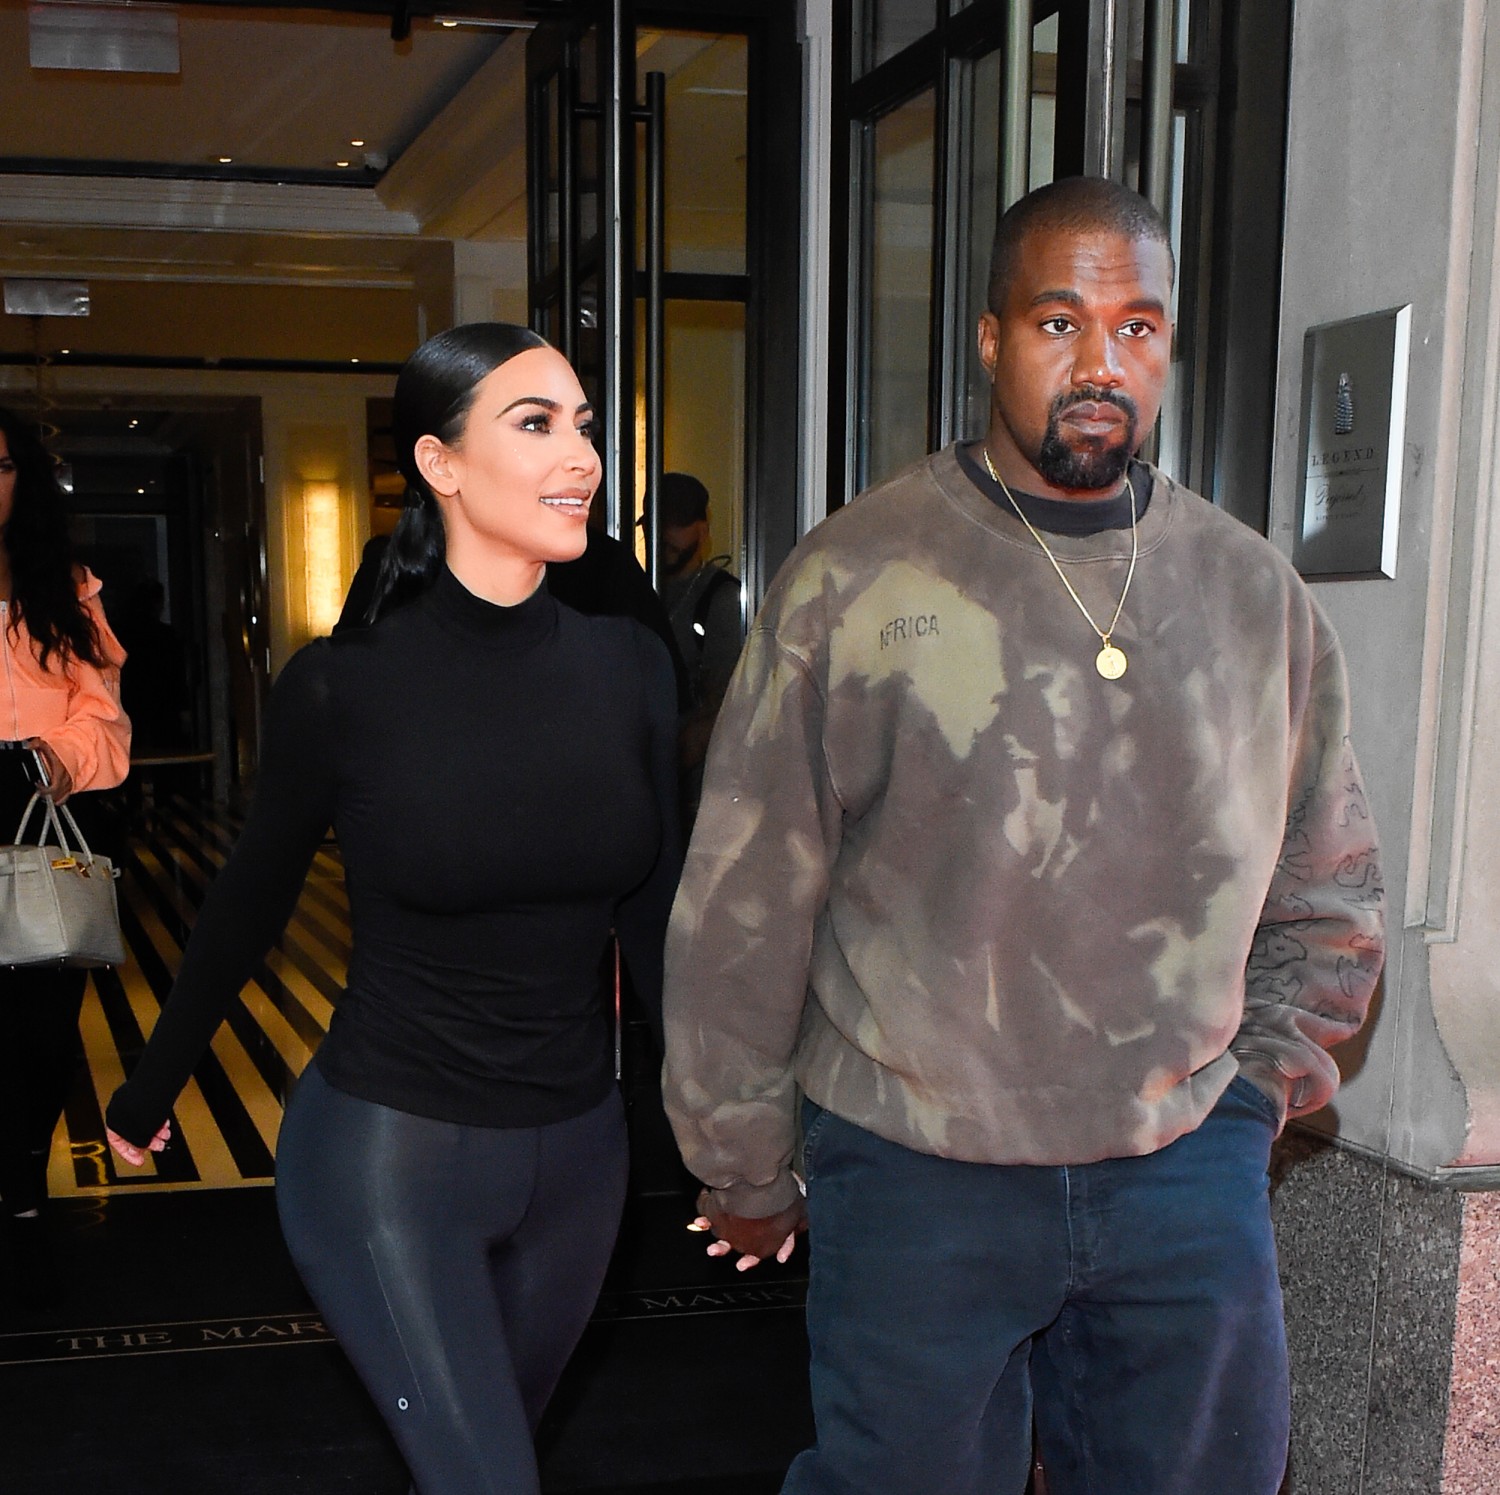 Kim Kardashian & Kanye West: What We're All Getting Wrong About Their  Situation